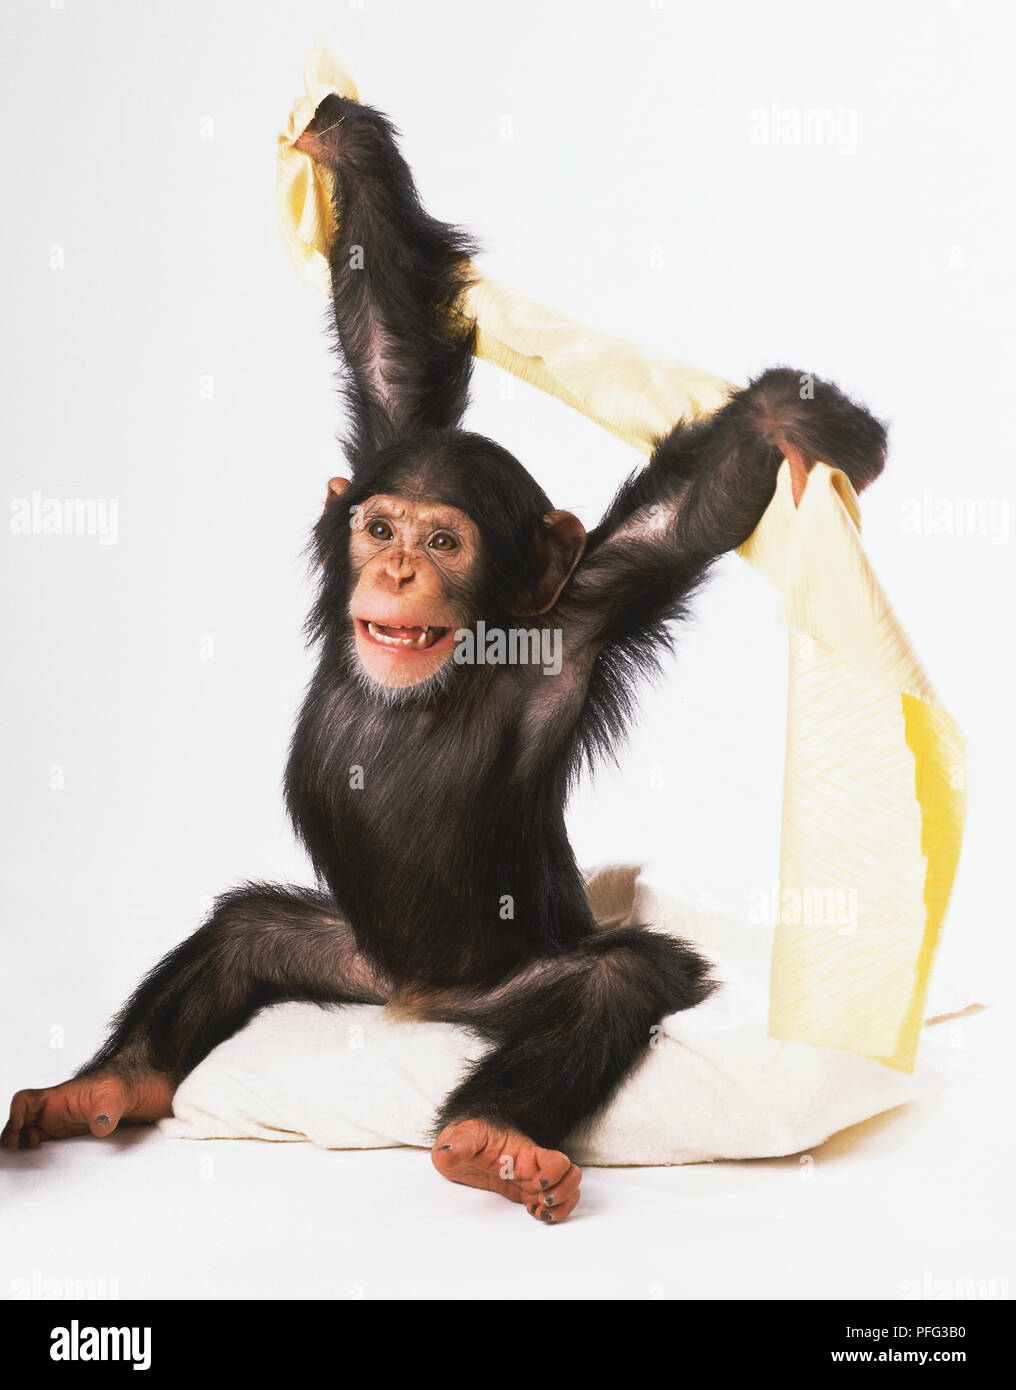 Young Chimpanzee holding blanket in air Stock Photo